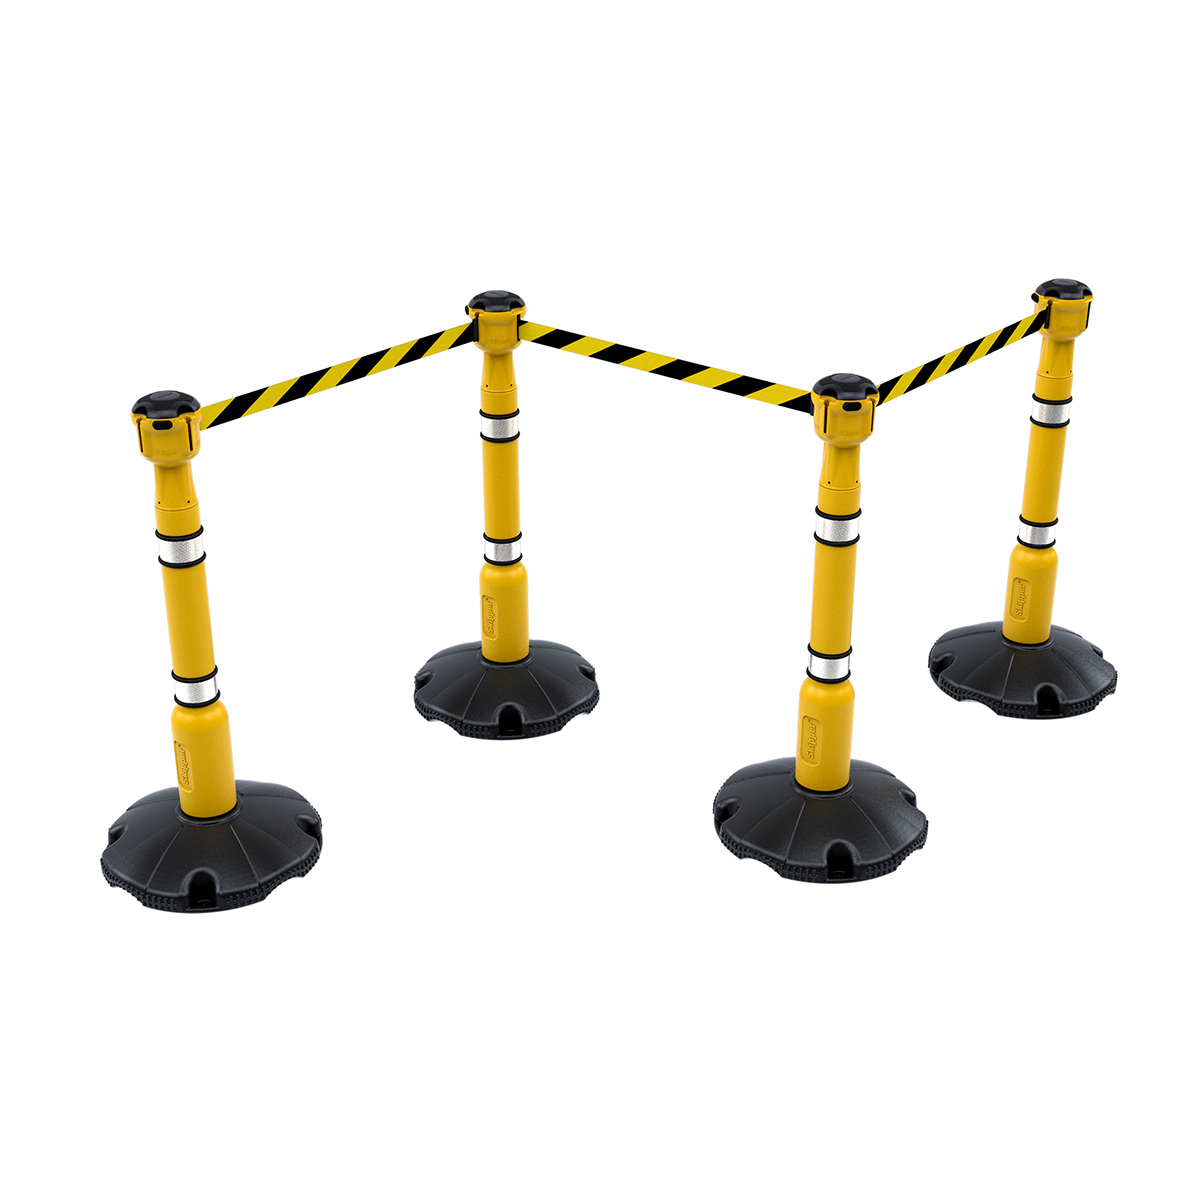 Skipper™ Portable Safety Barrier Kit 27m - Made Form Hardwearing Materials With Unique Patented Designs